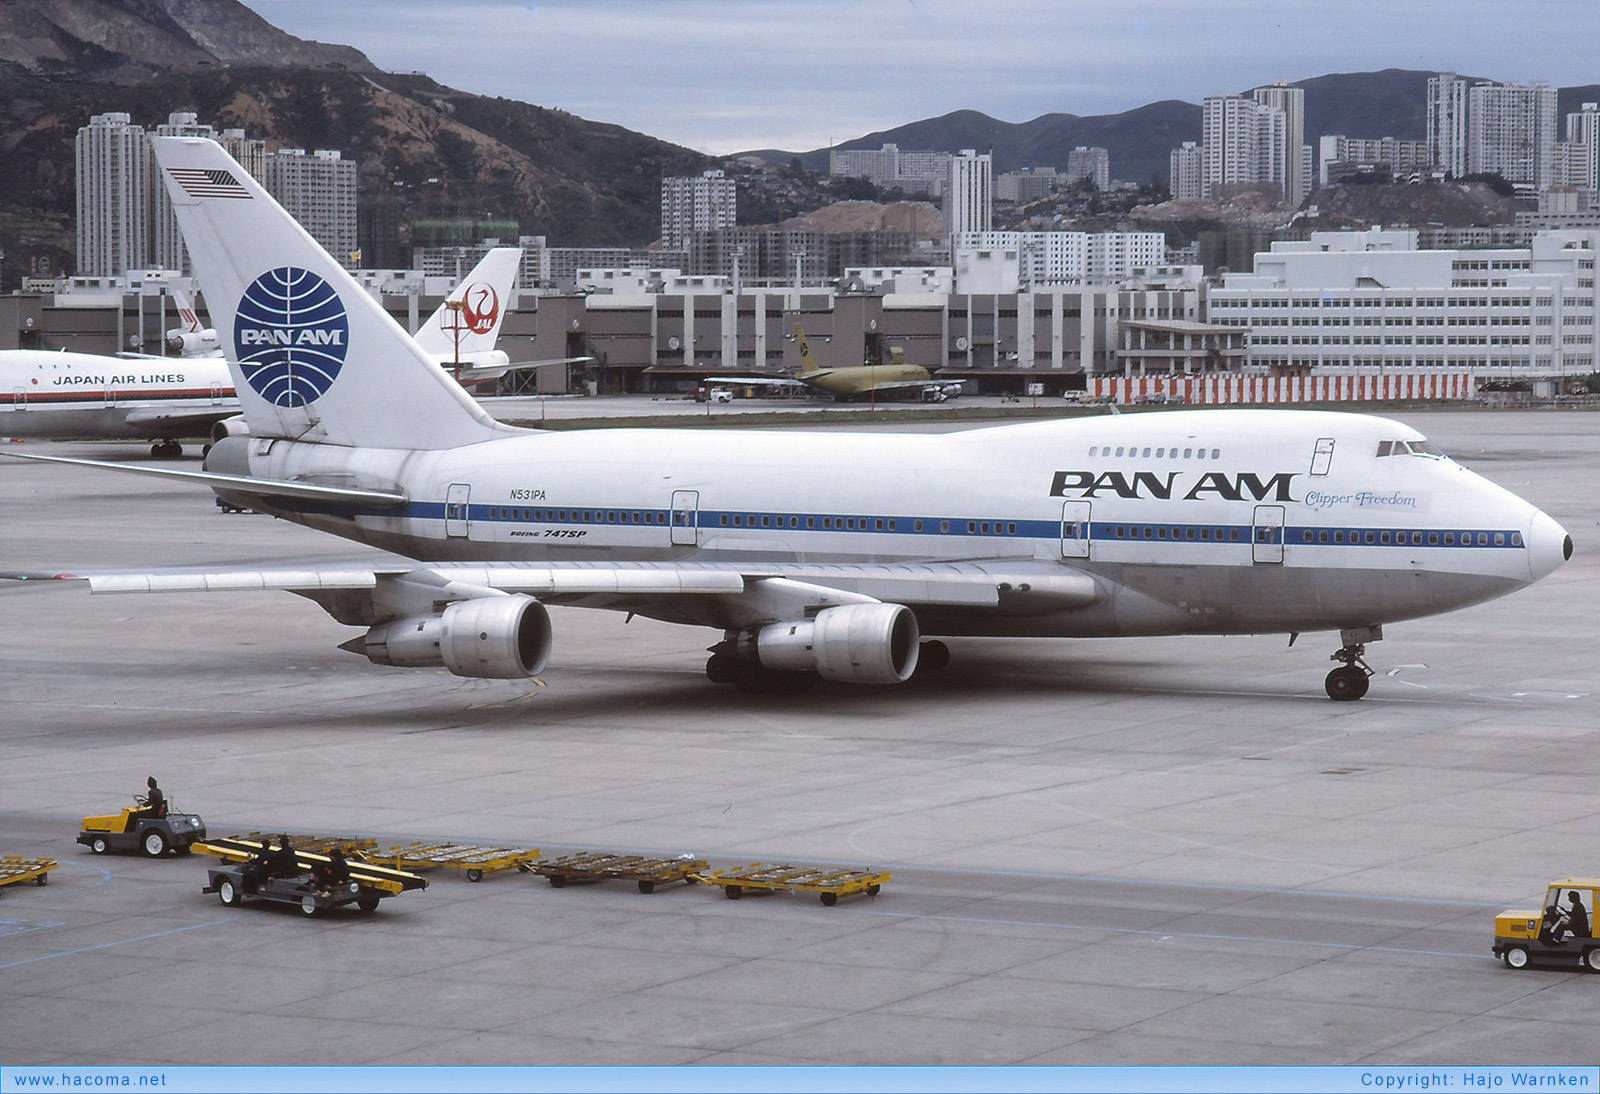 Photo of N531PA - Pan Am Clipper Liberty Bell / Freedom - Kai Tak Airport - Apr 14, 1980